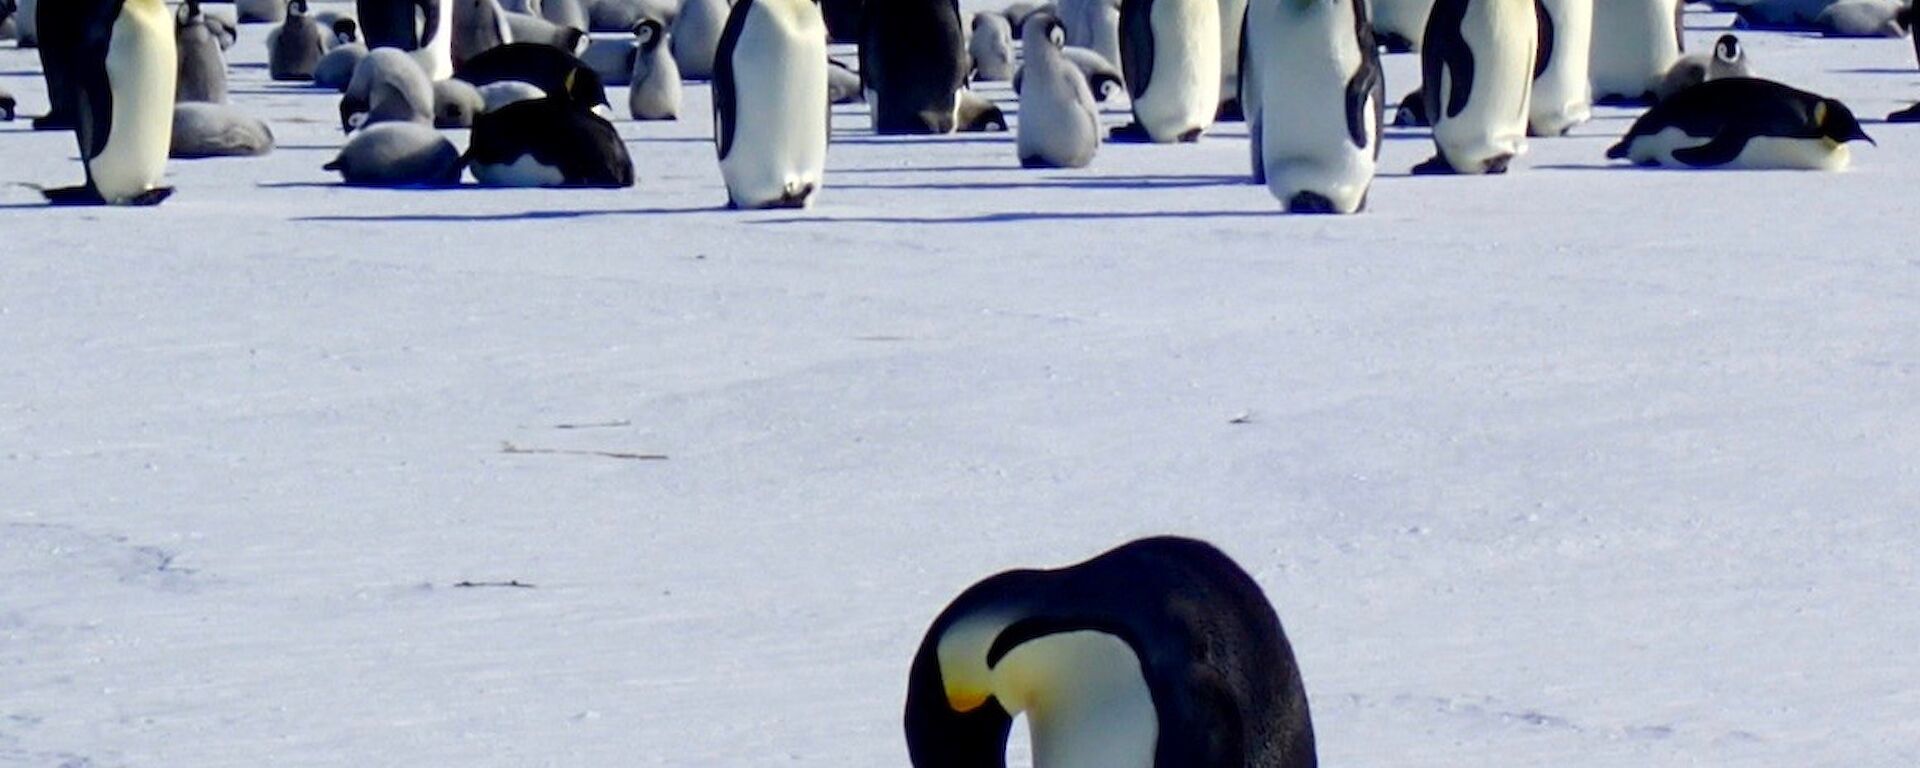 A group of penguins with an adult and chick in the foreground